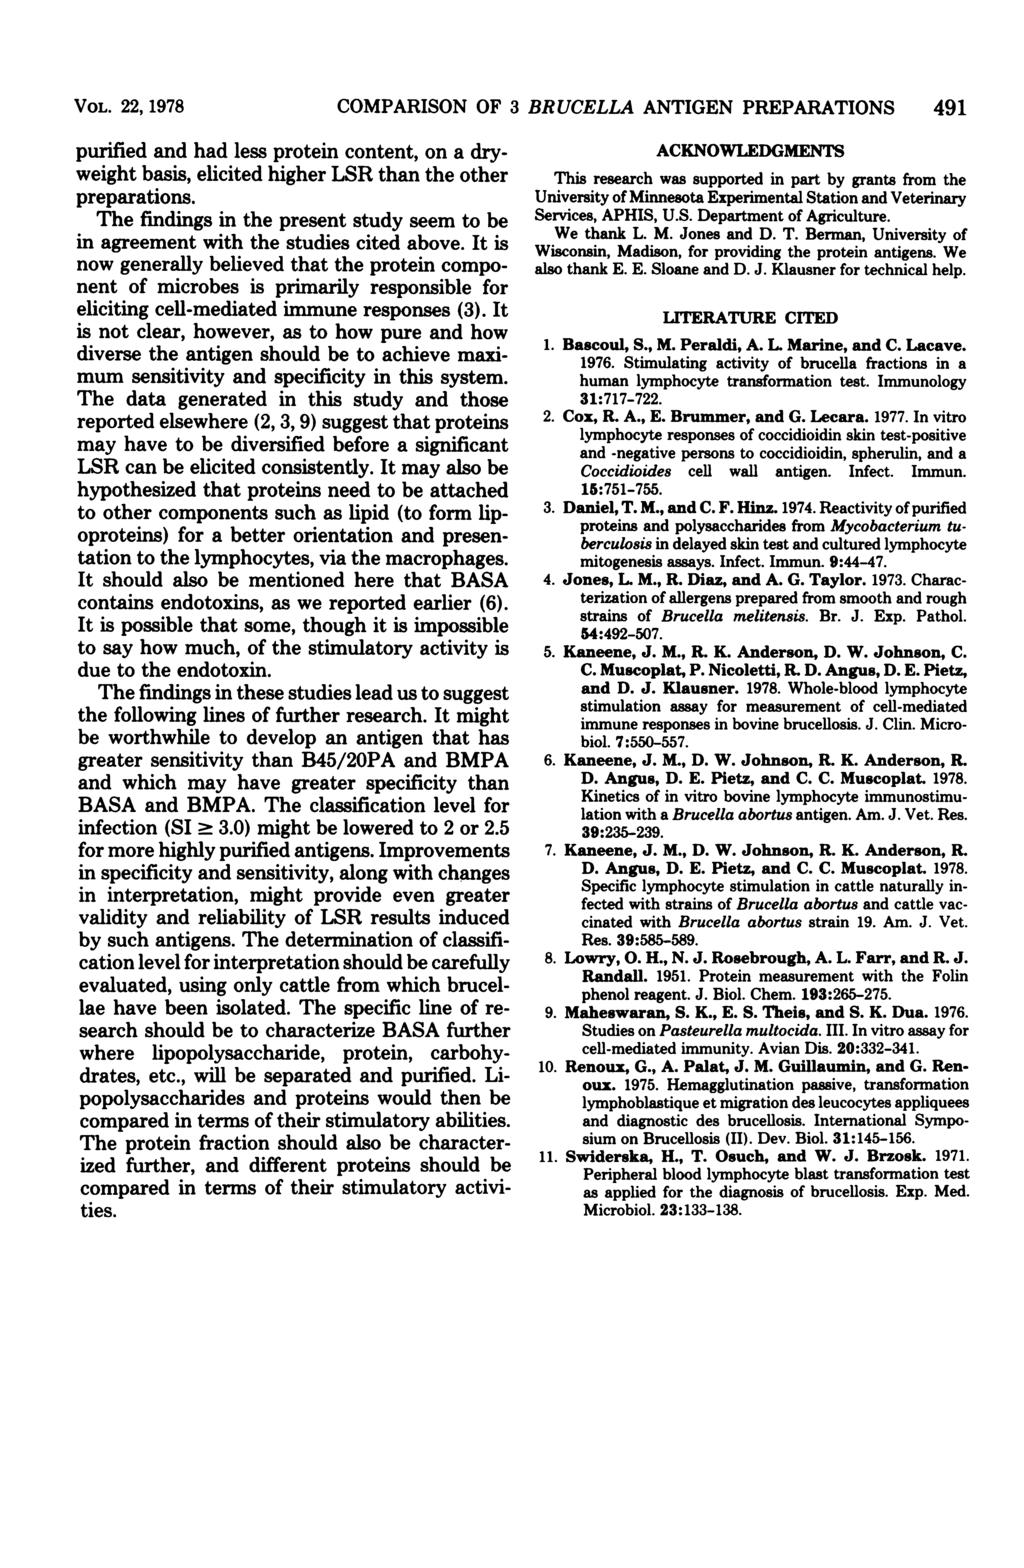 VOL. 22, 1978 purified nd hd less protein content, on dryweight bsis, elicited higher LSR thn the other preprtions.